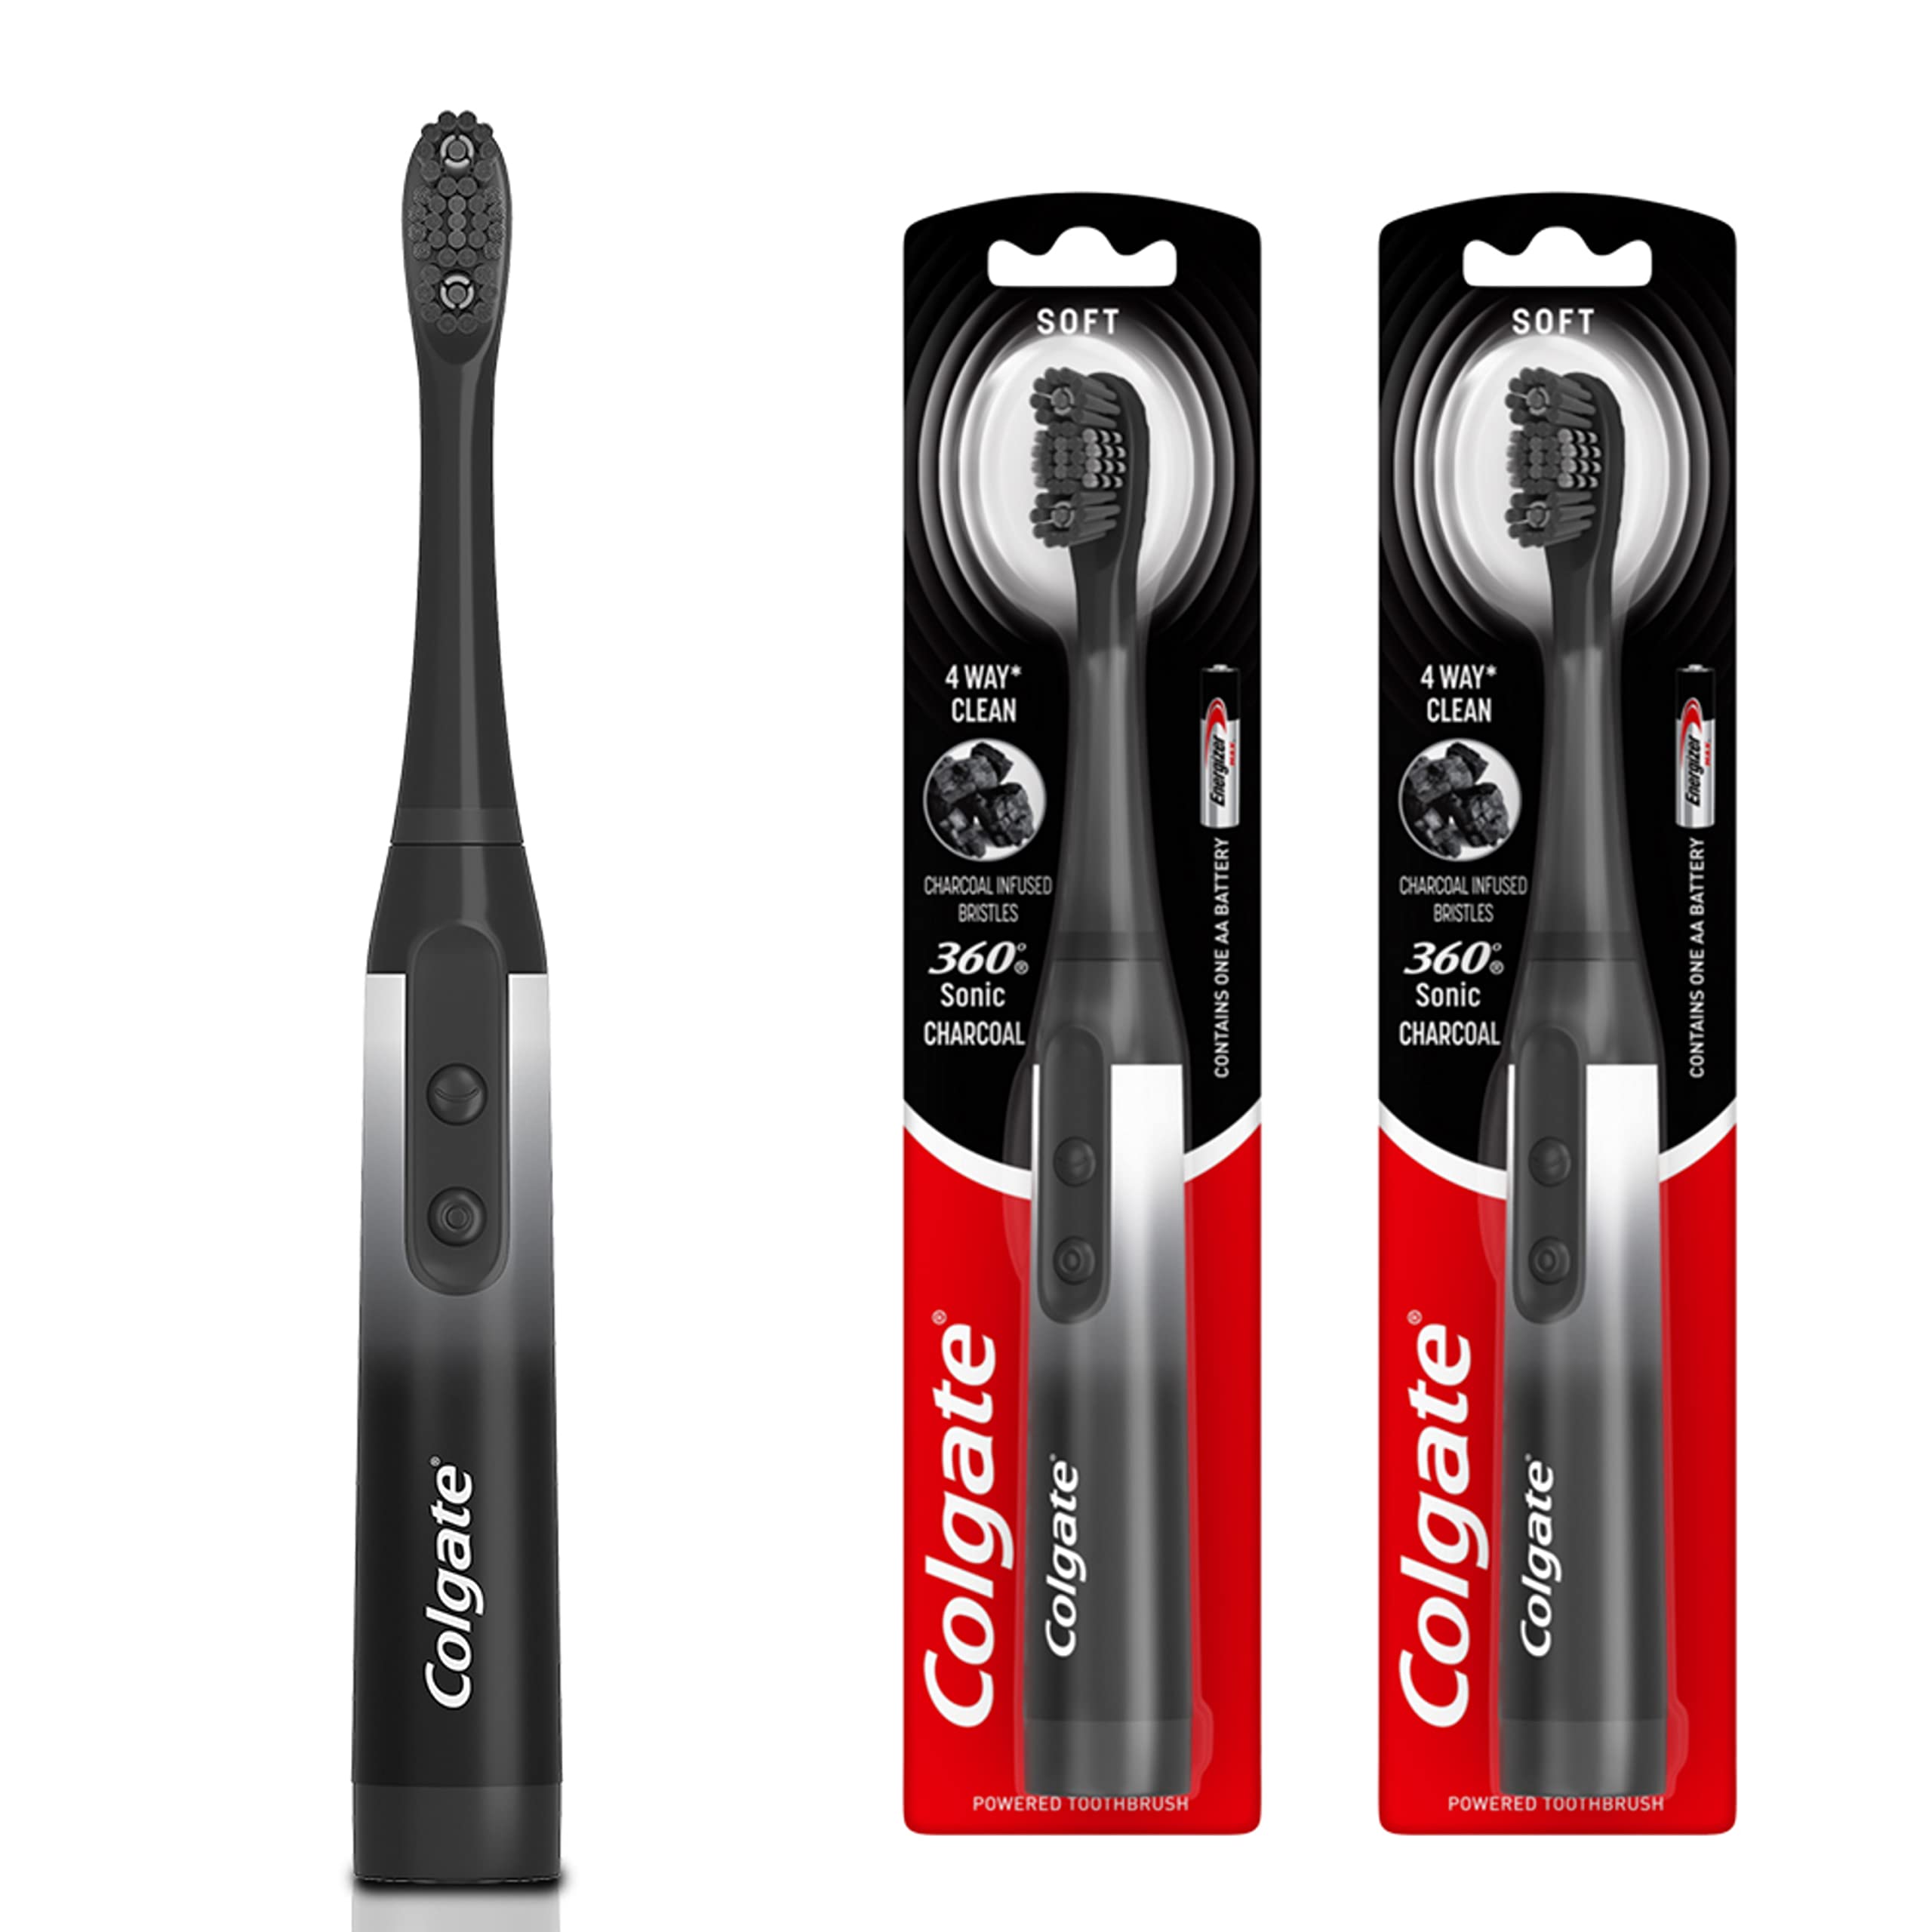 2-Pack Colgate 360 Charcoal Sonic Powered Battery Toothbrush $9.96 ($4.98 each) + Free Shipping w/ Prime or on $35+